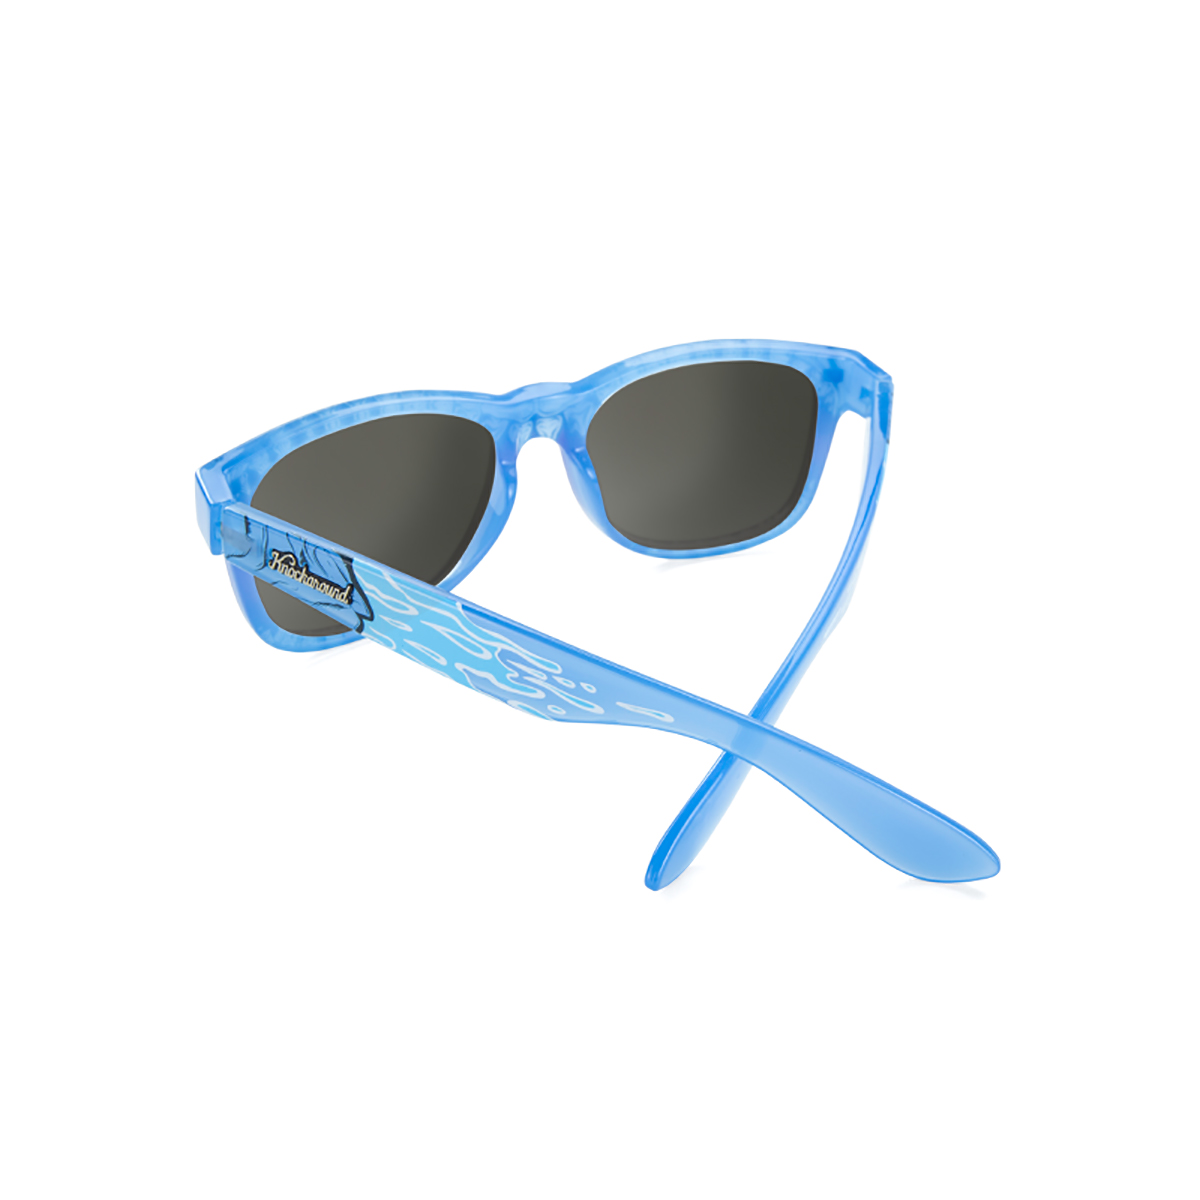 Knockaround Fort Knocks Special Release, , large image number null